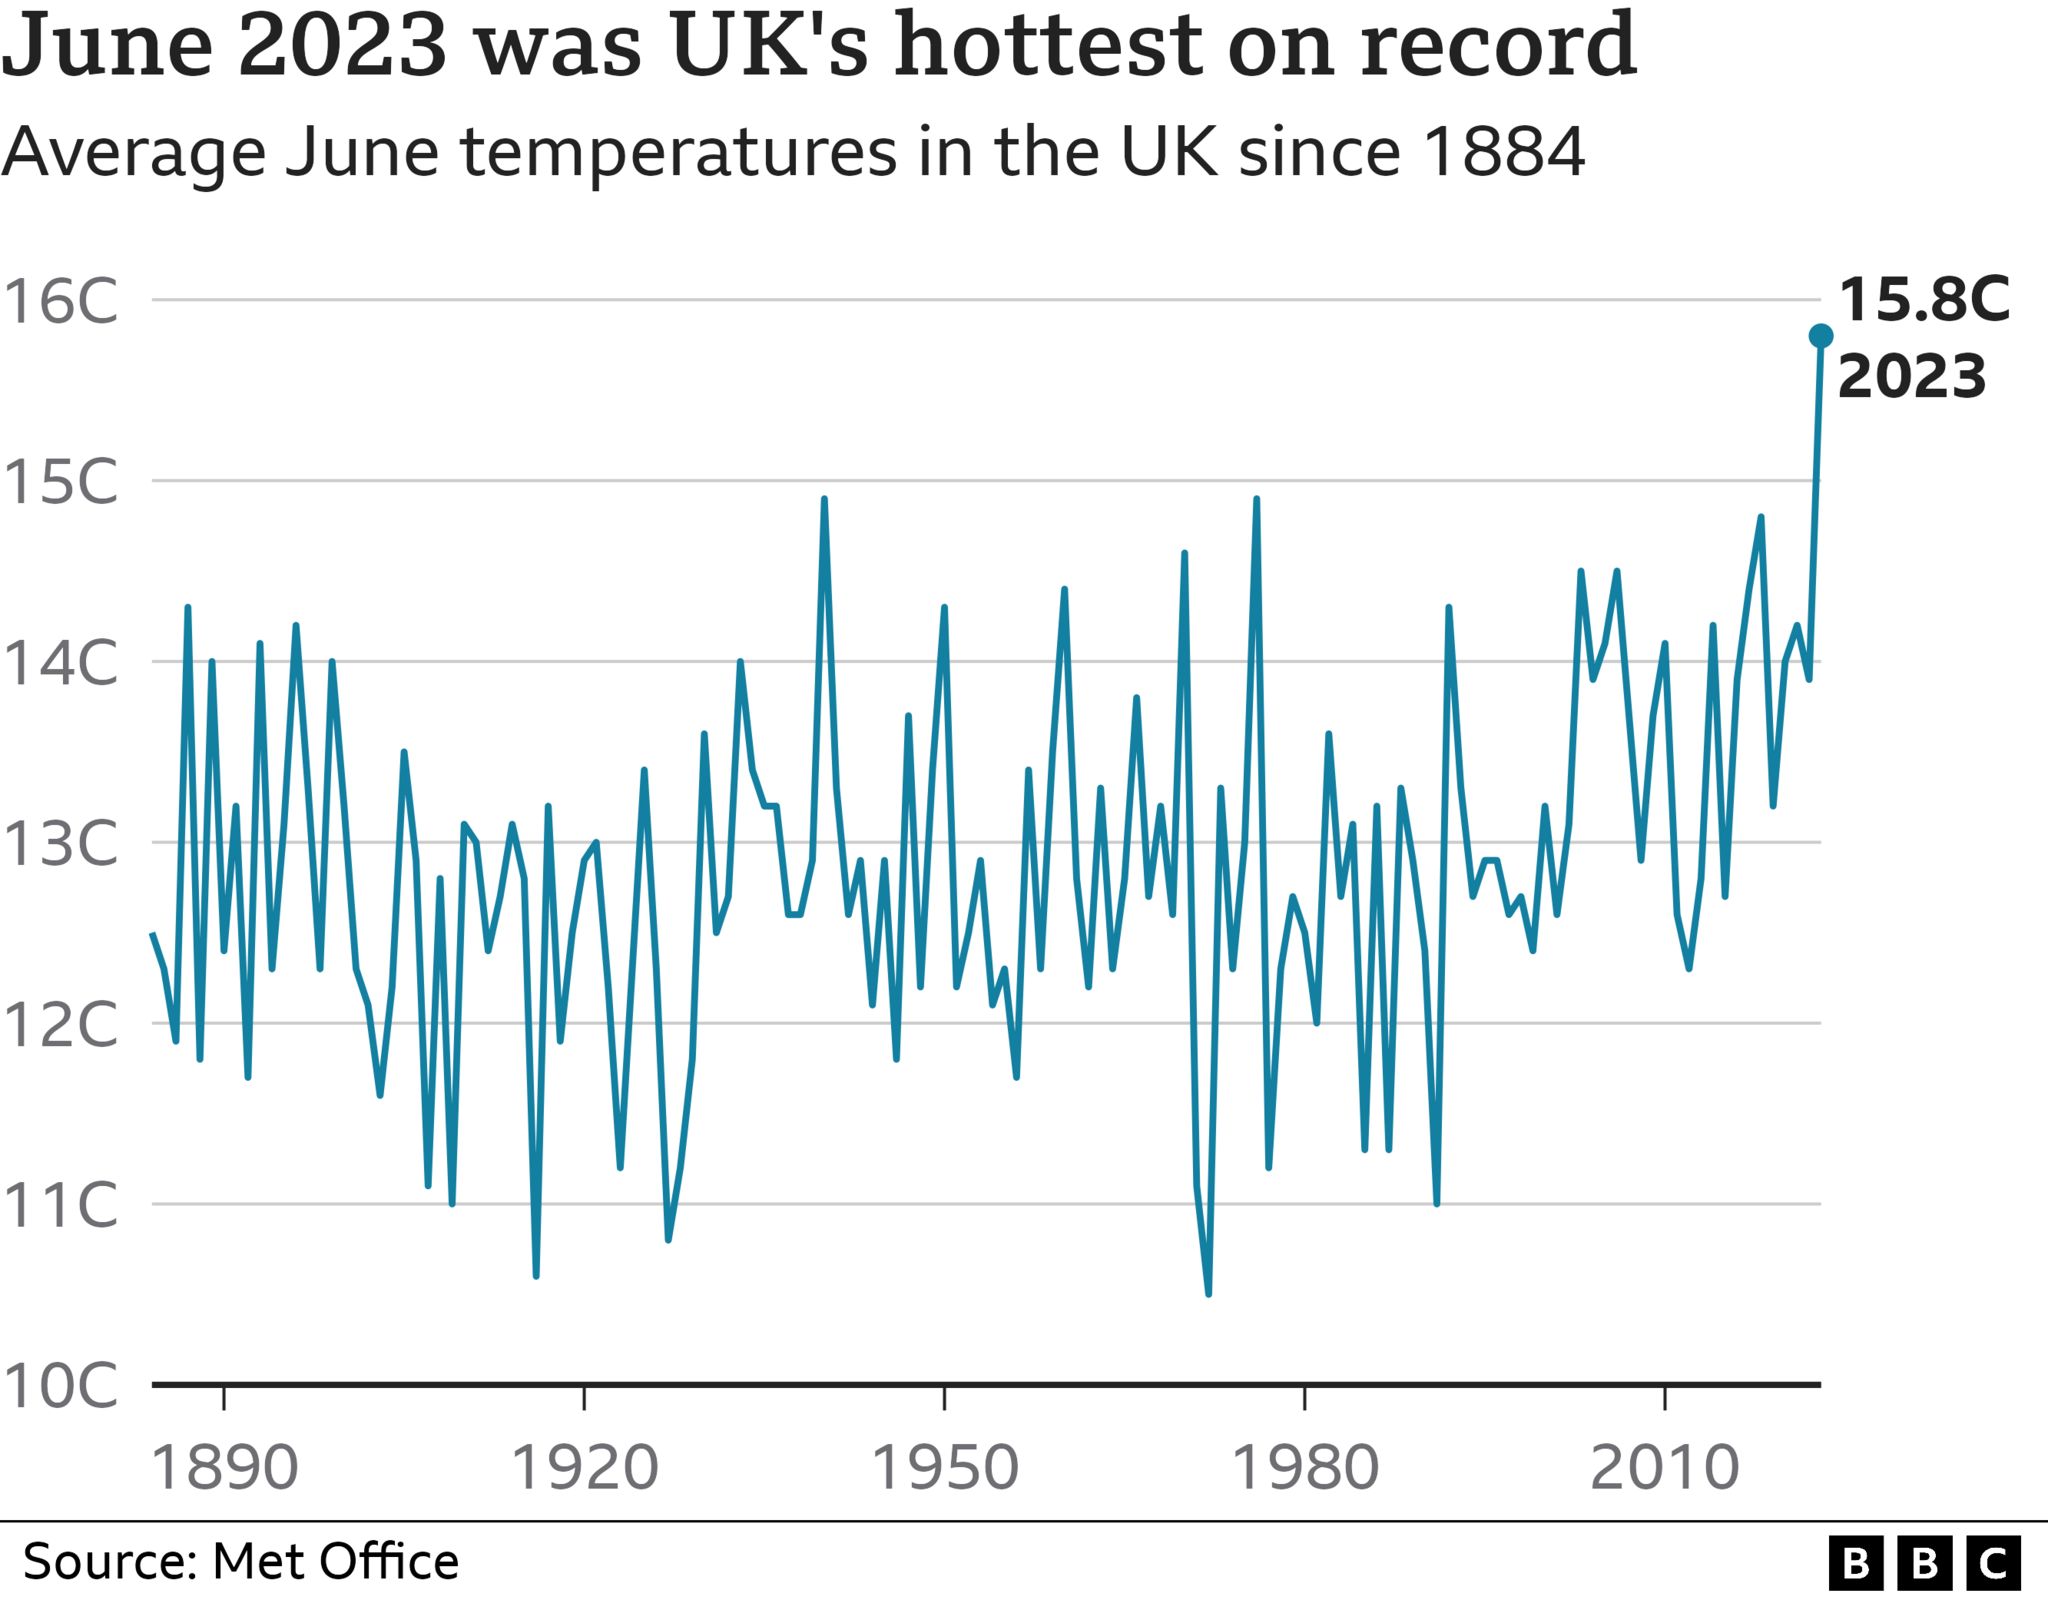 A graph showing average June temperatures in the UK since 1884